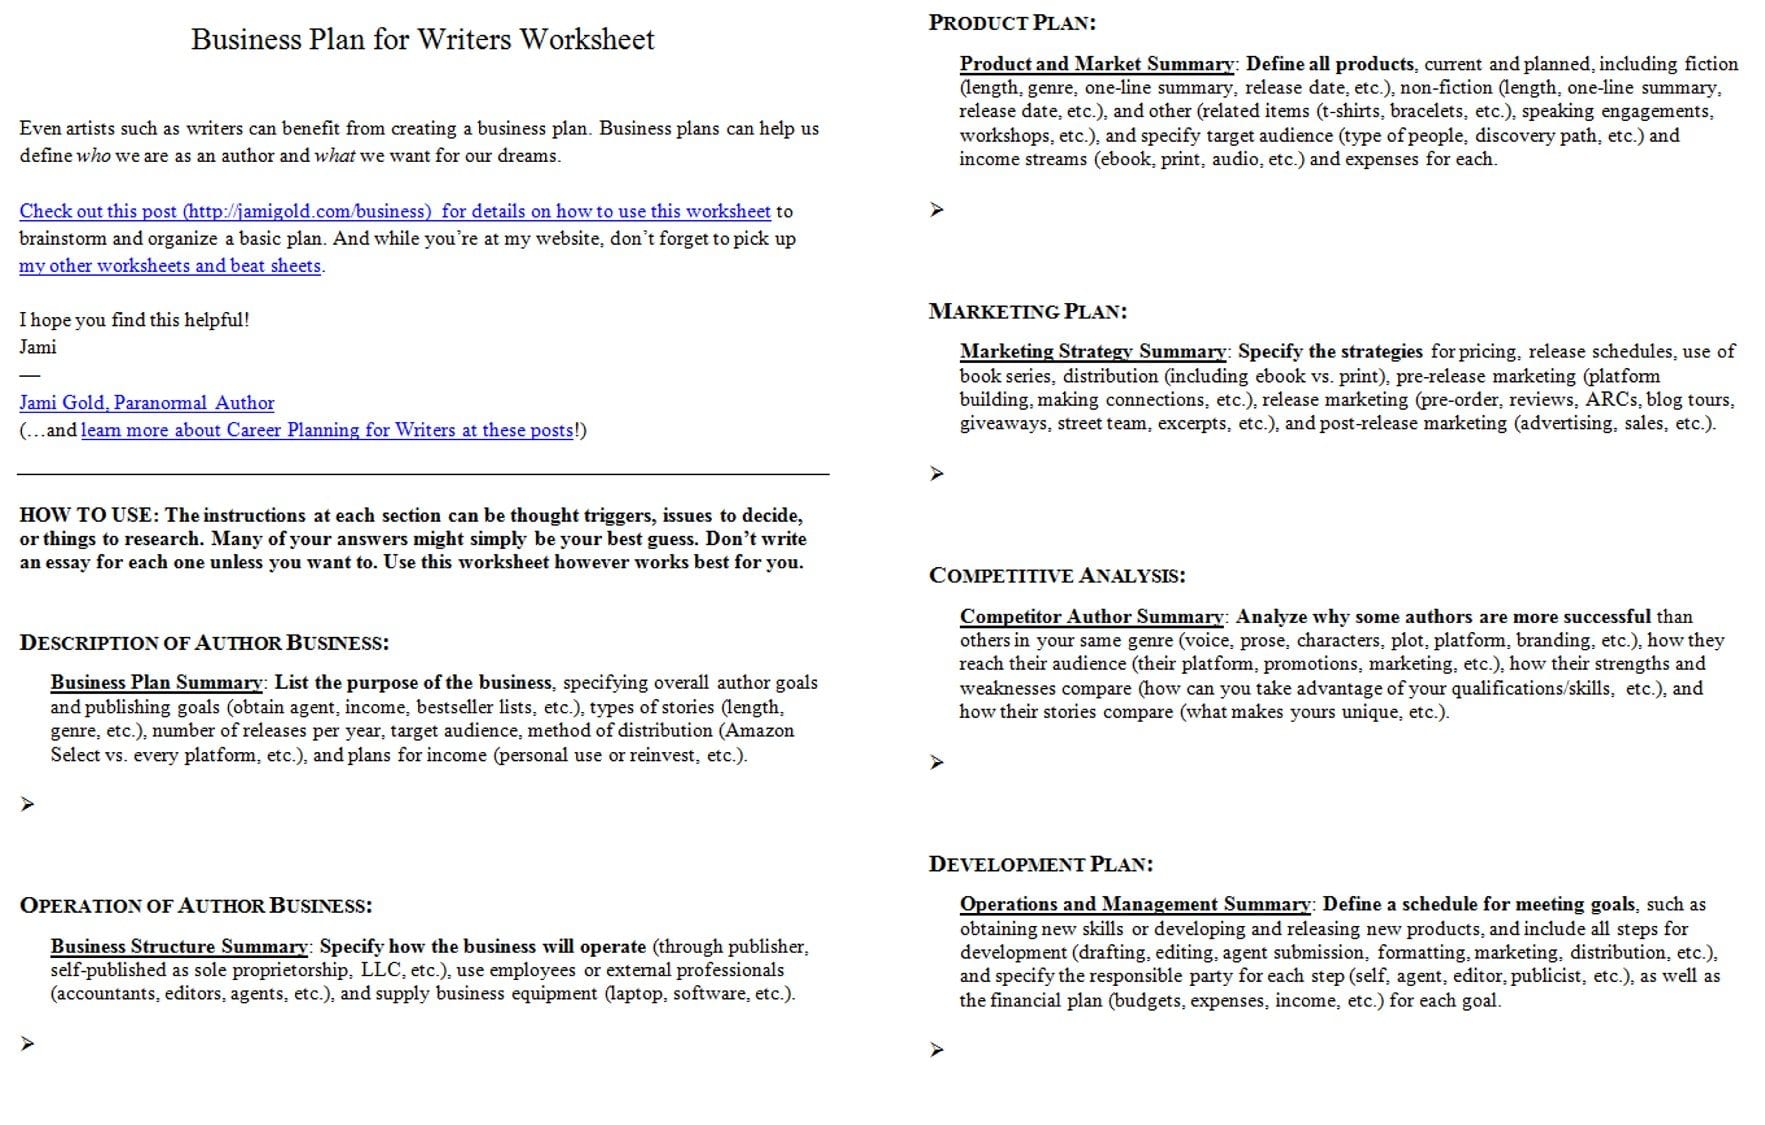 Worksheets For Writers  Jami Gold Paranormal Author For Memoir Writing Worksheets